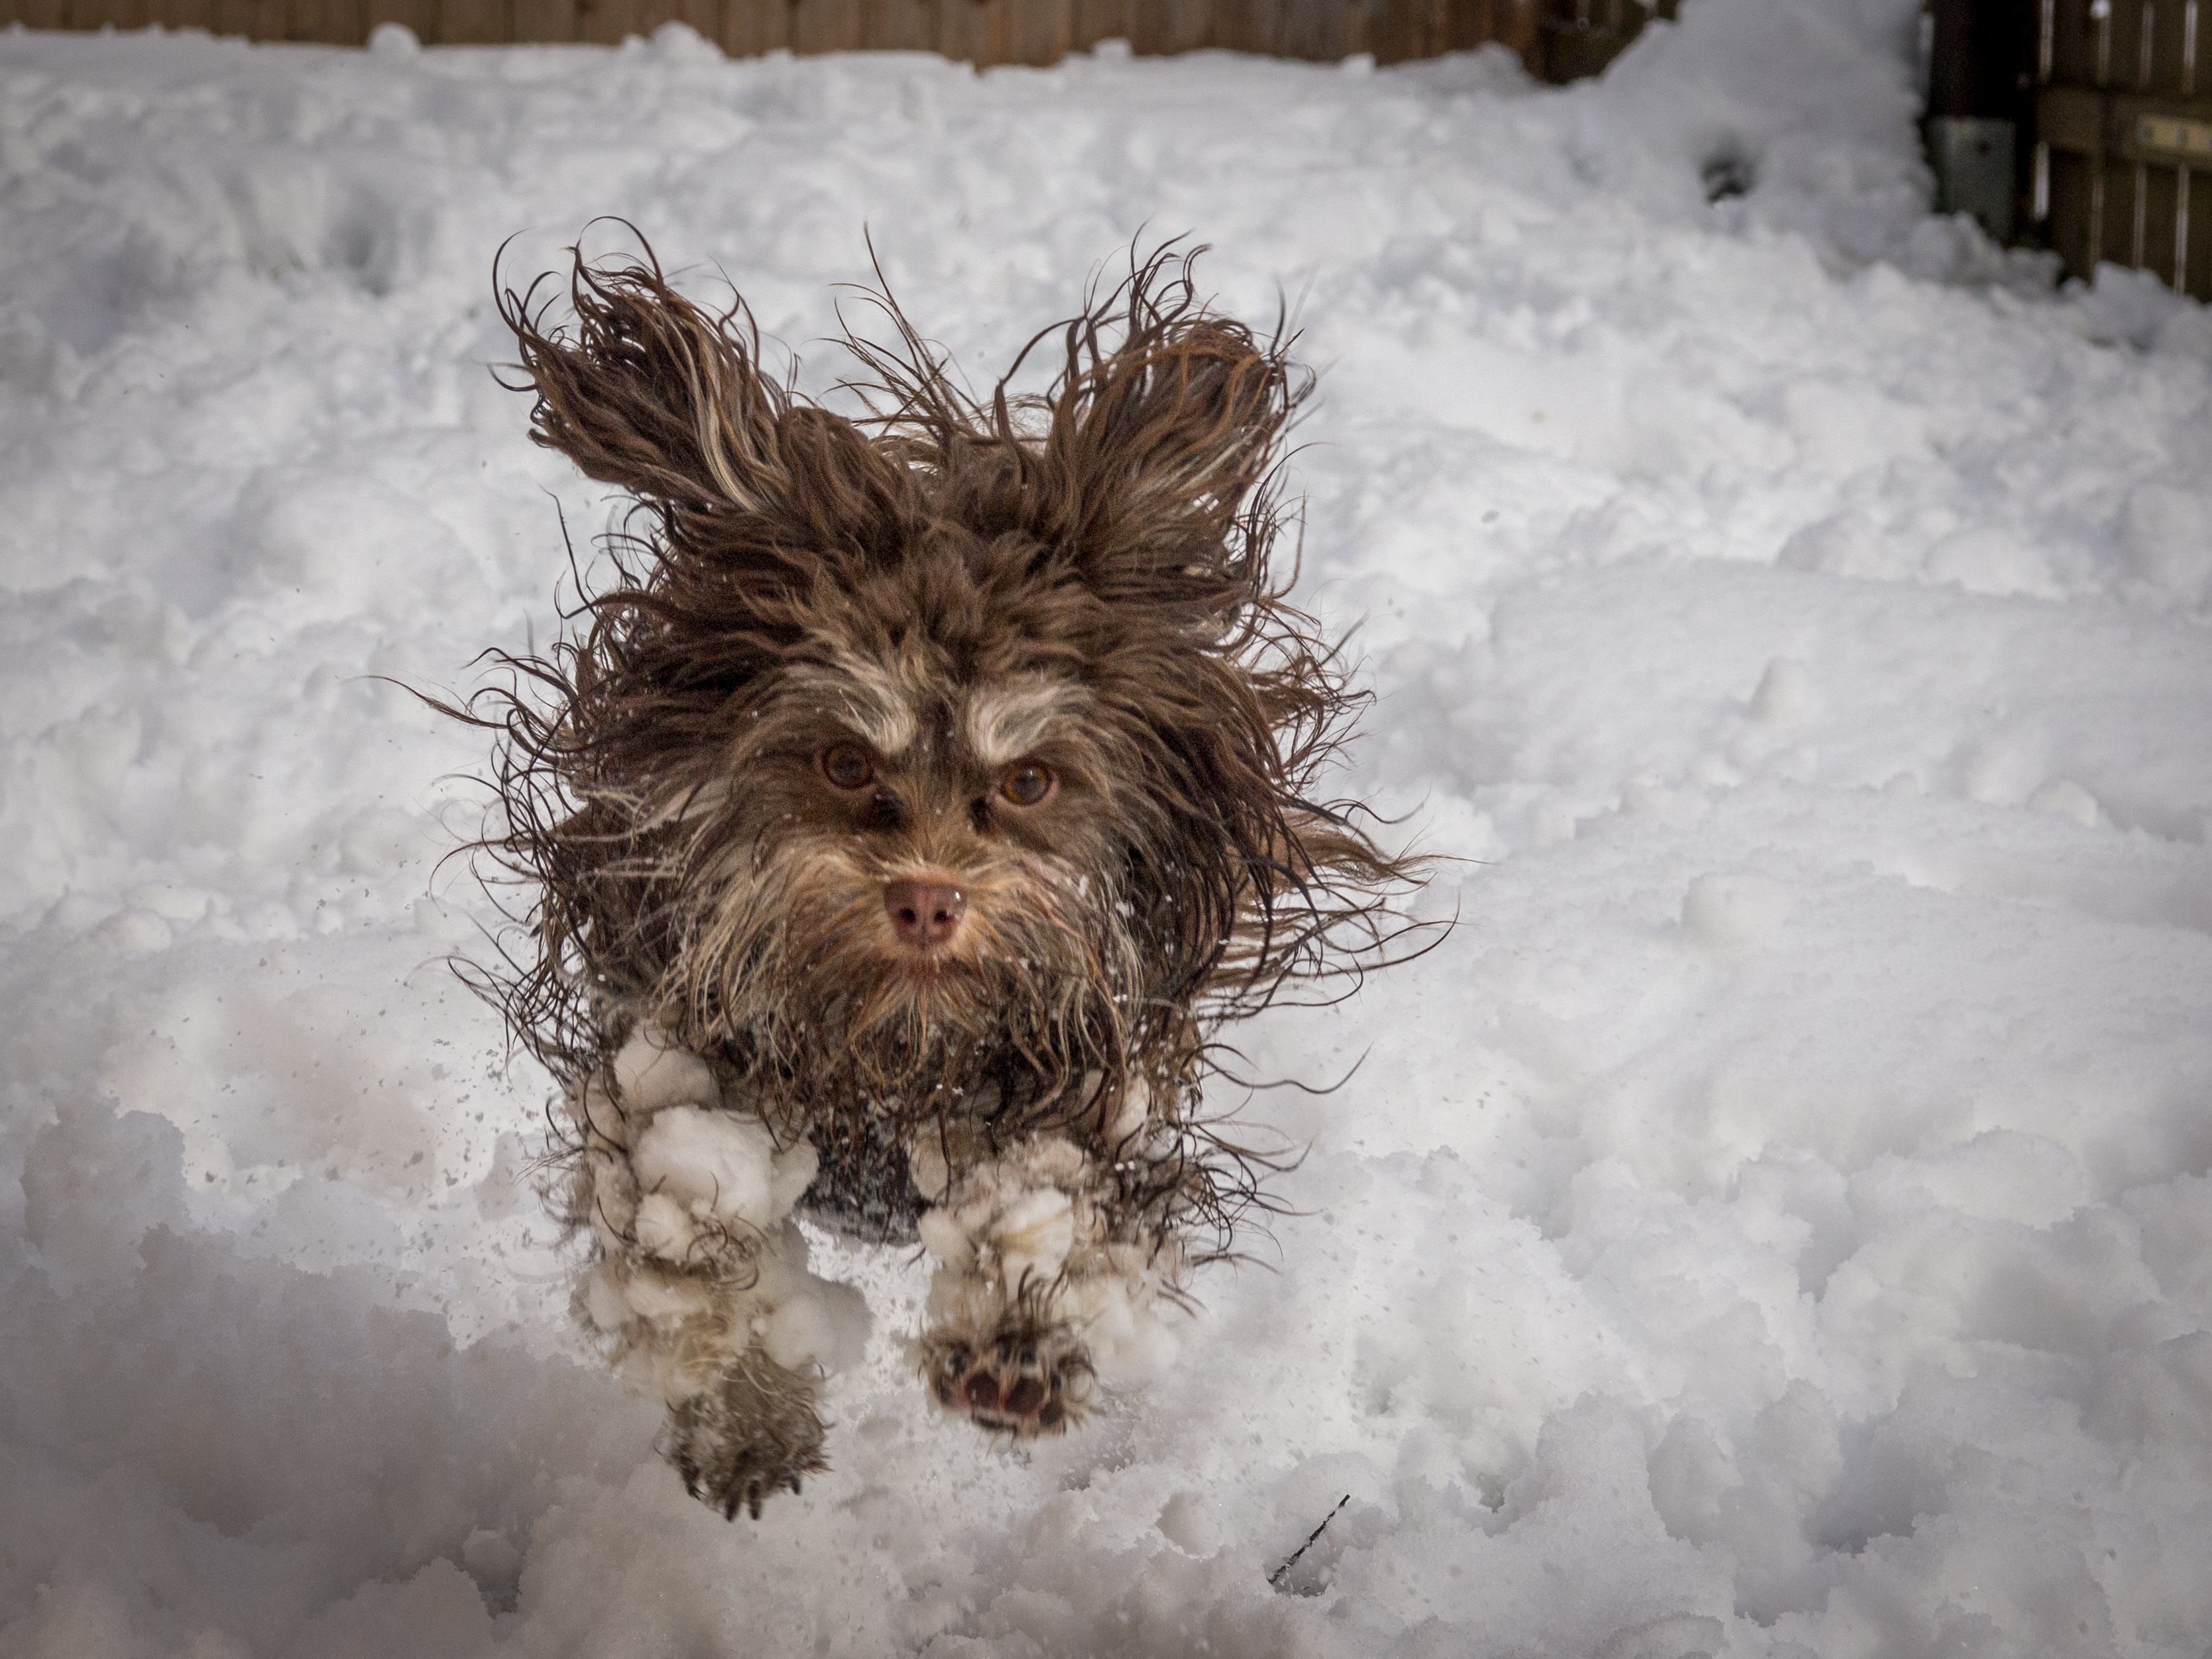 A brown, wet small dog leaping through the snow with icy paws